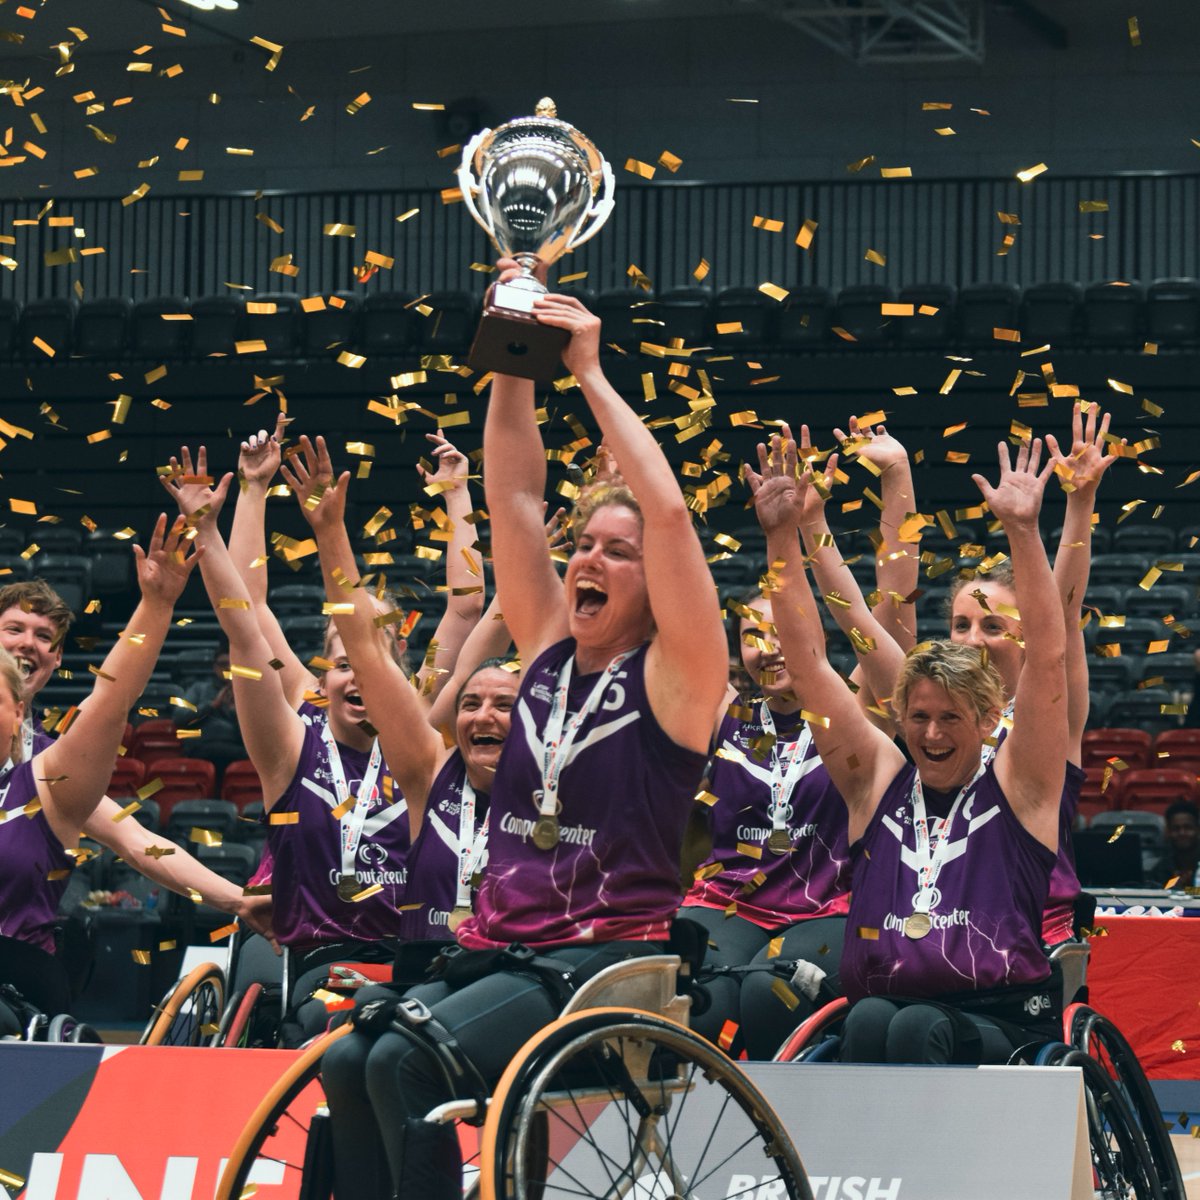 We're thrilled to announce our long-standing partnership with Loughborough Sport has been extended for another year. The new deal will see Computacenter continue to support elite-level female and Para sport programmes. Discover more bit.ly/49Z5TF6 #WinningTogether